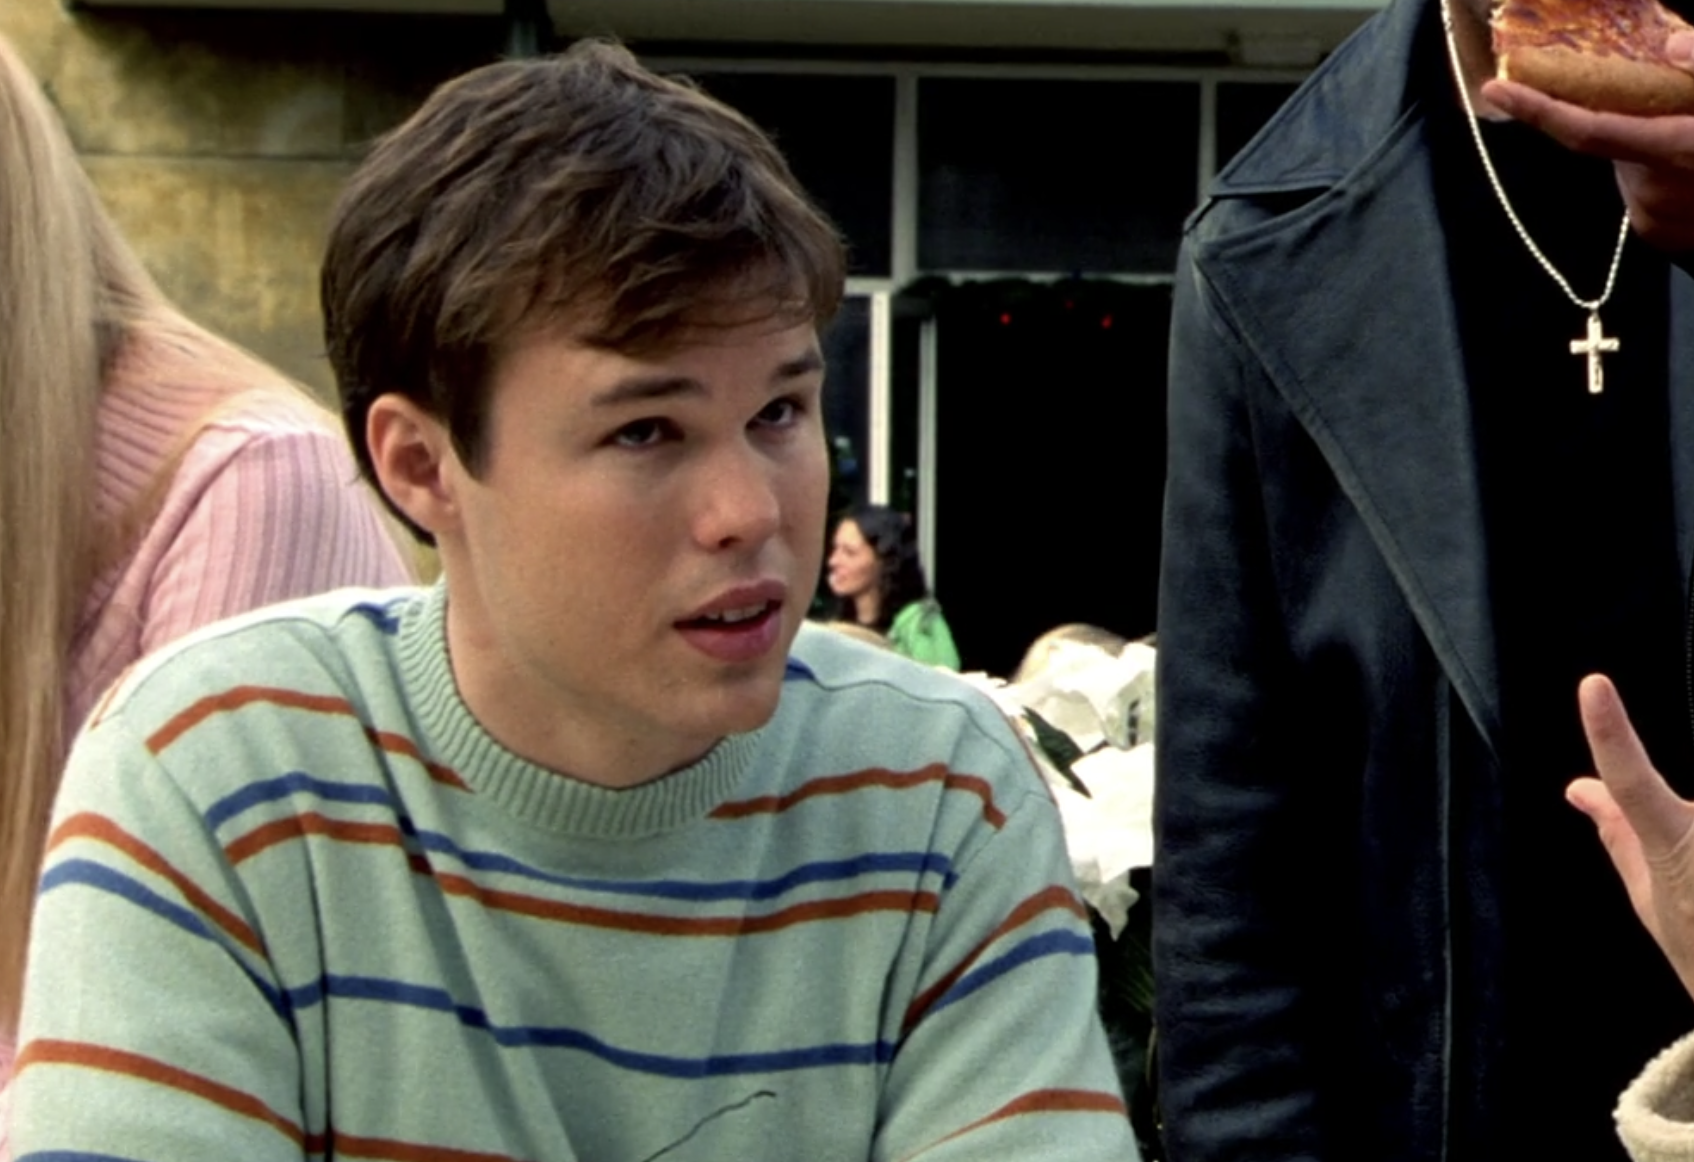 Screenshot from Veronica Mars season one, episode 10. Sean, a white teen with brown hair, in a light blue sweater with horizontal stripes looks up at someone off screen.